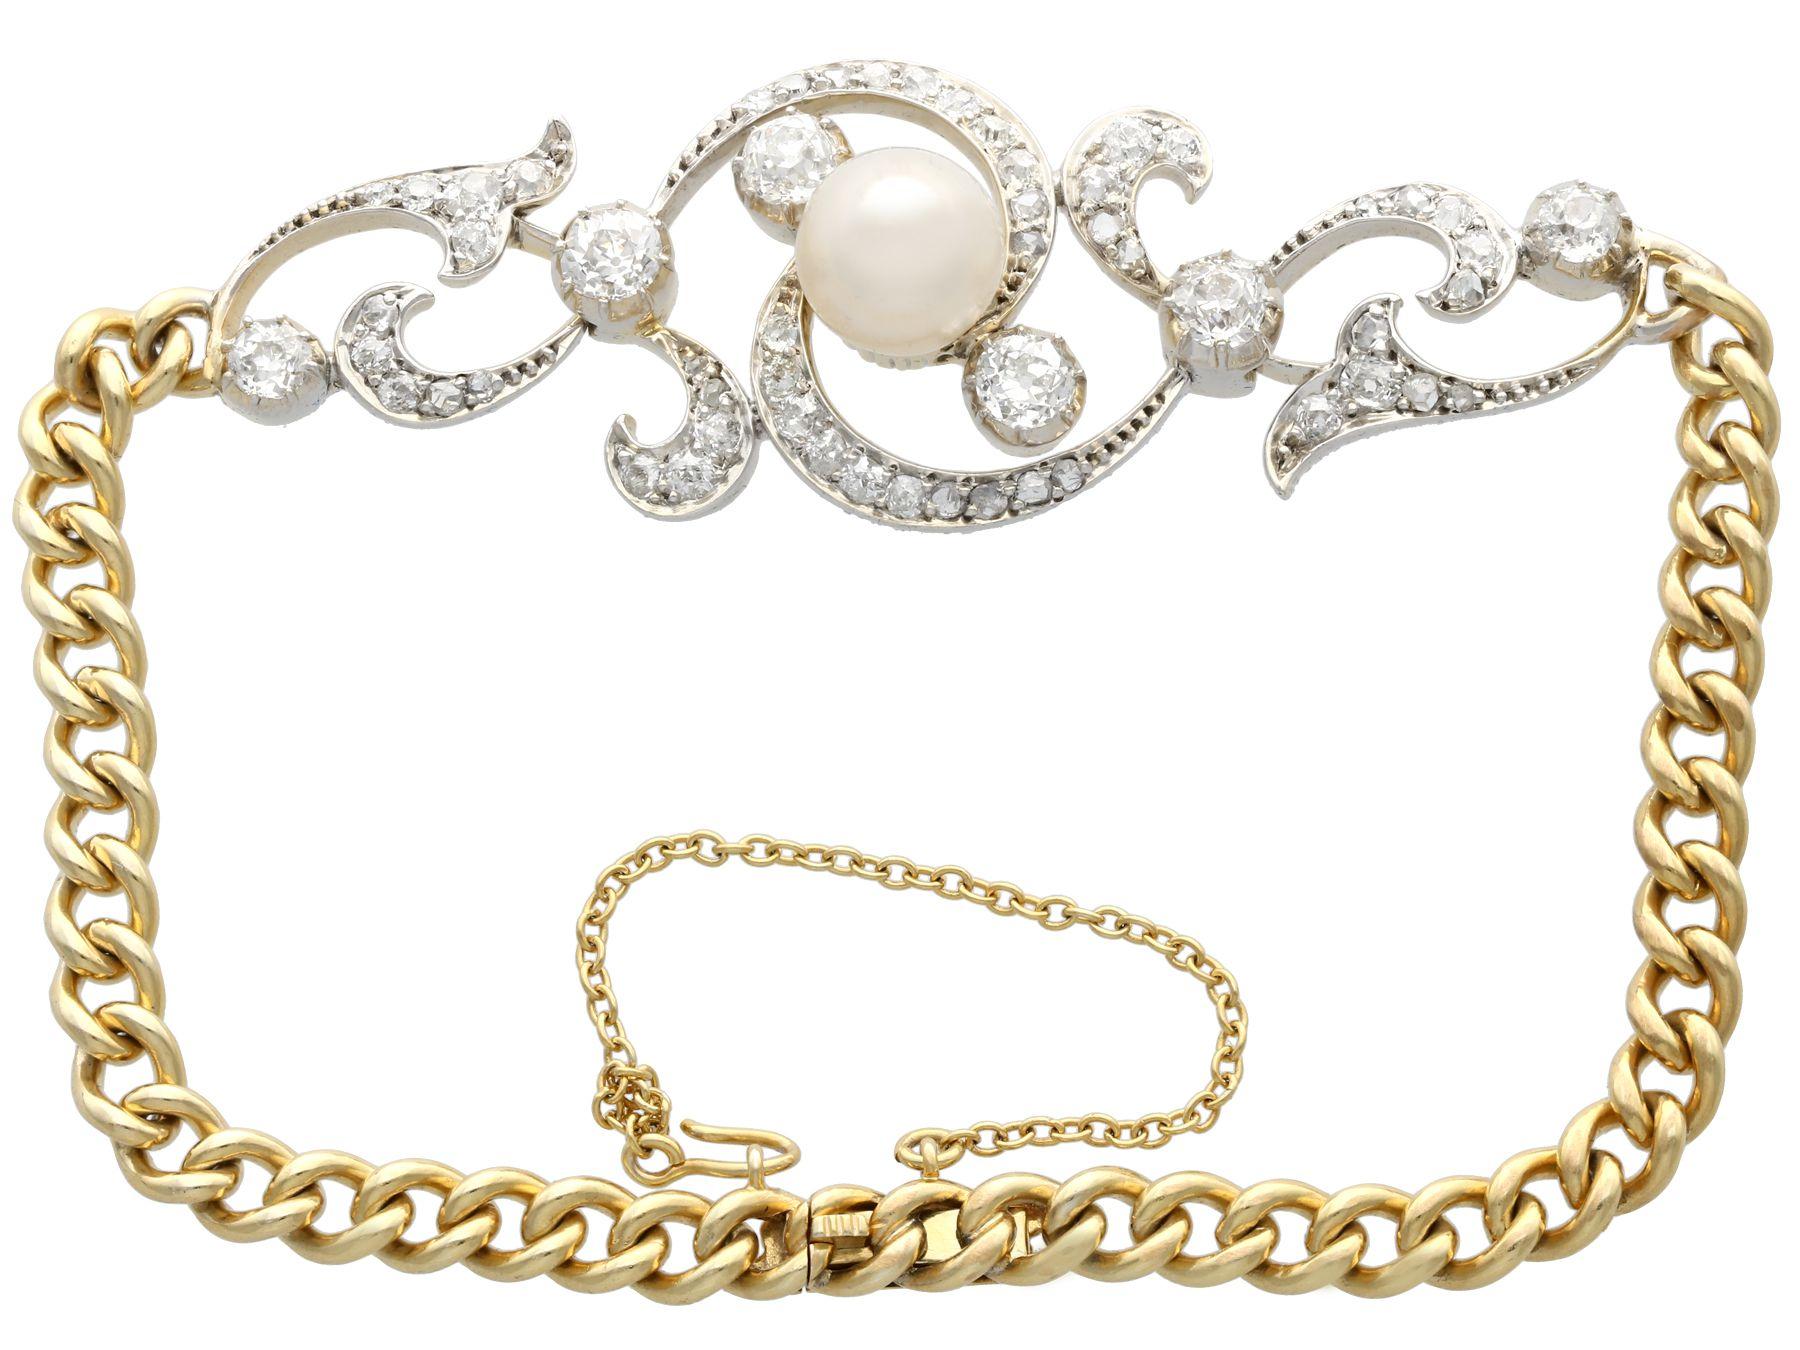 A stunning, fine and impressive antique Victorian natural saltwater pearl and 2.72 carat diamond, 15 karat yellow gold and silver set bracelet; part of our antique jewelry and estate jewelry collections.

This stunning, fine and impressive antique